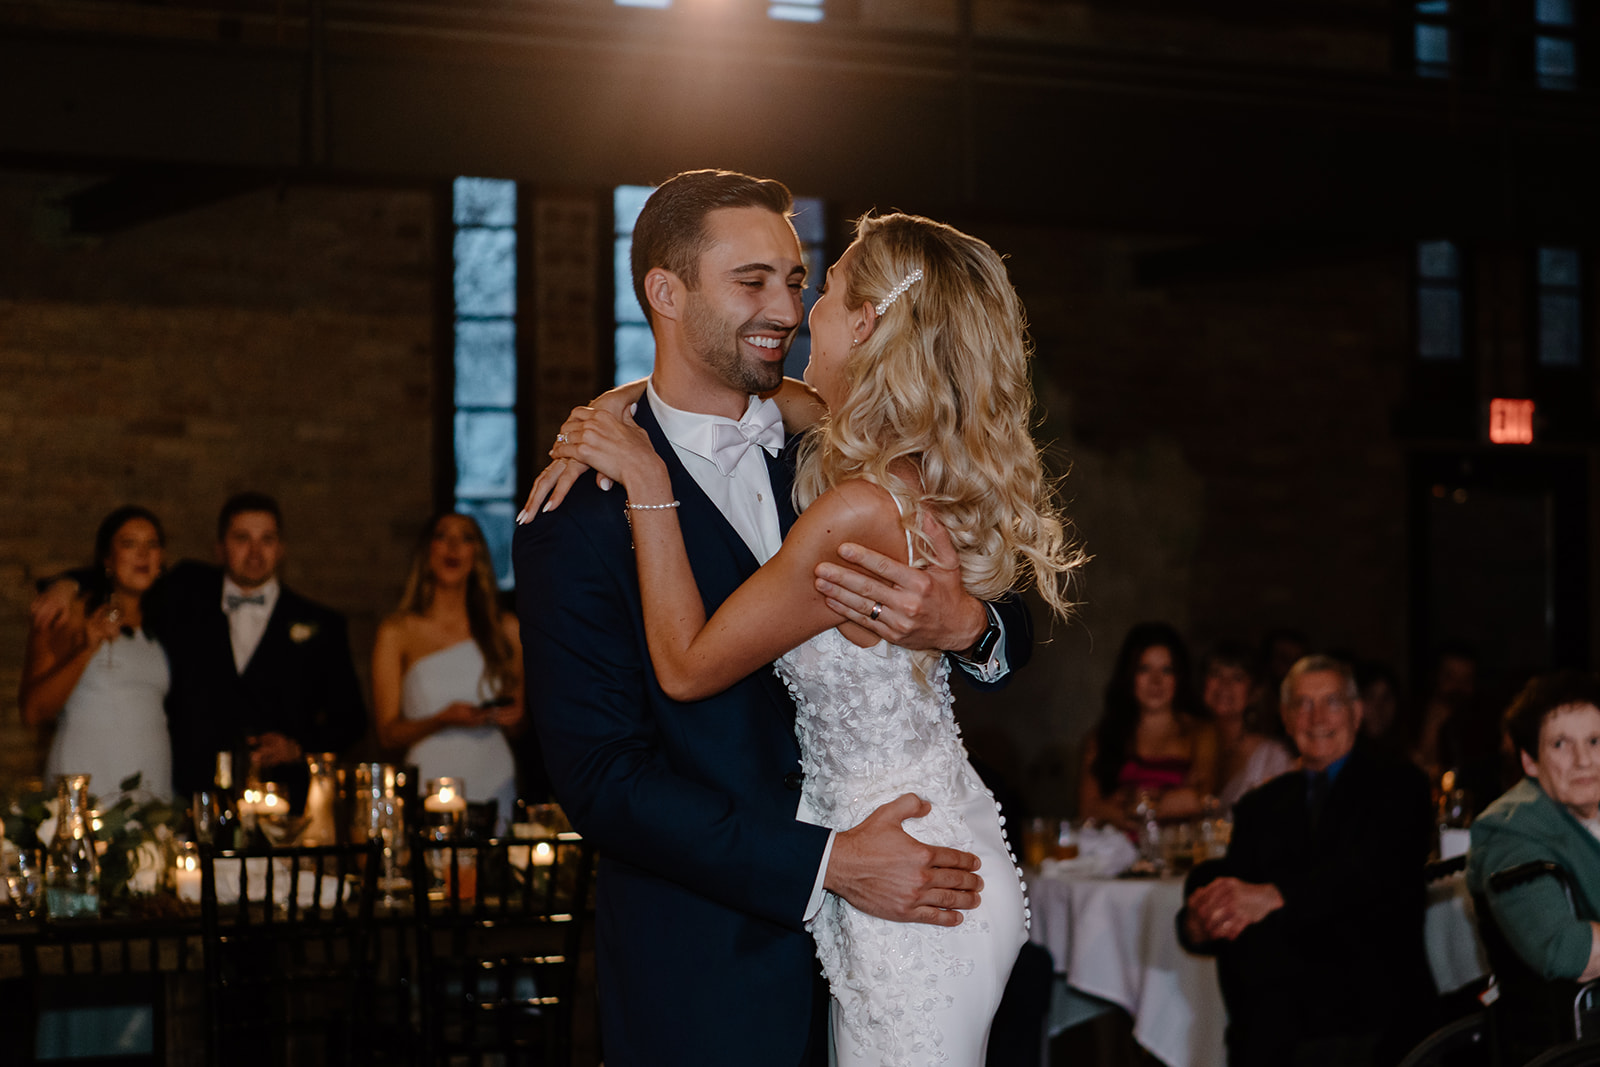 Bride and groom dance on the dance floor at their wedding venue.